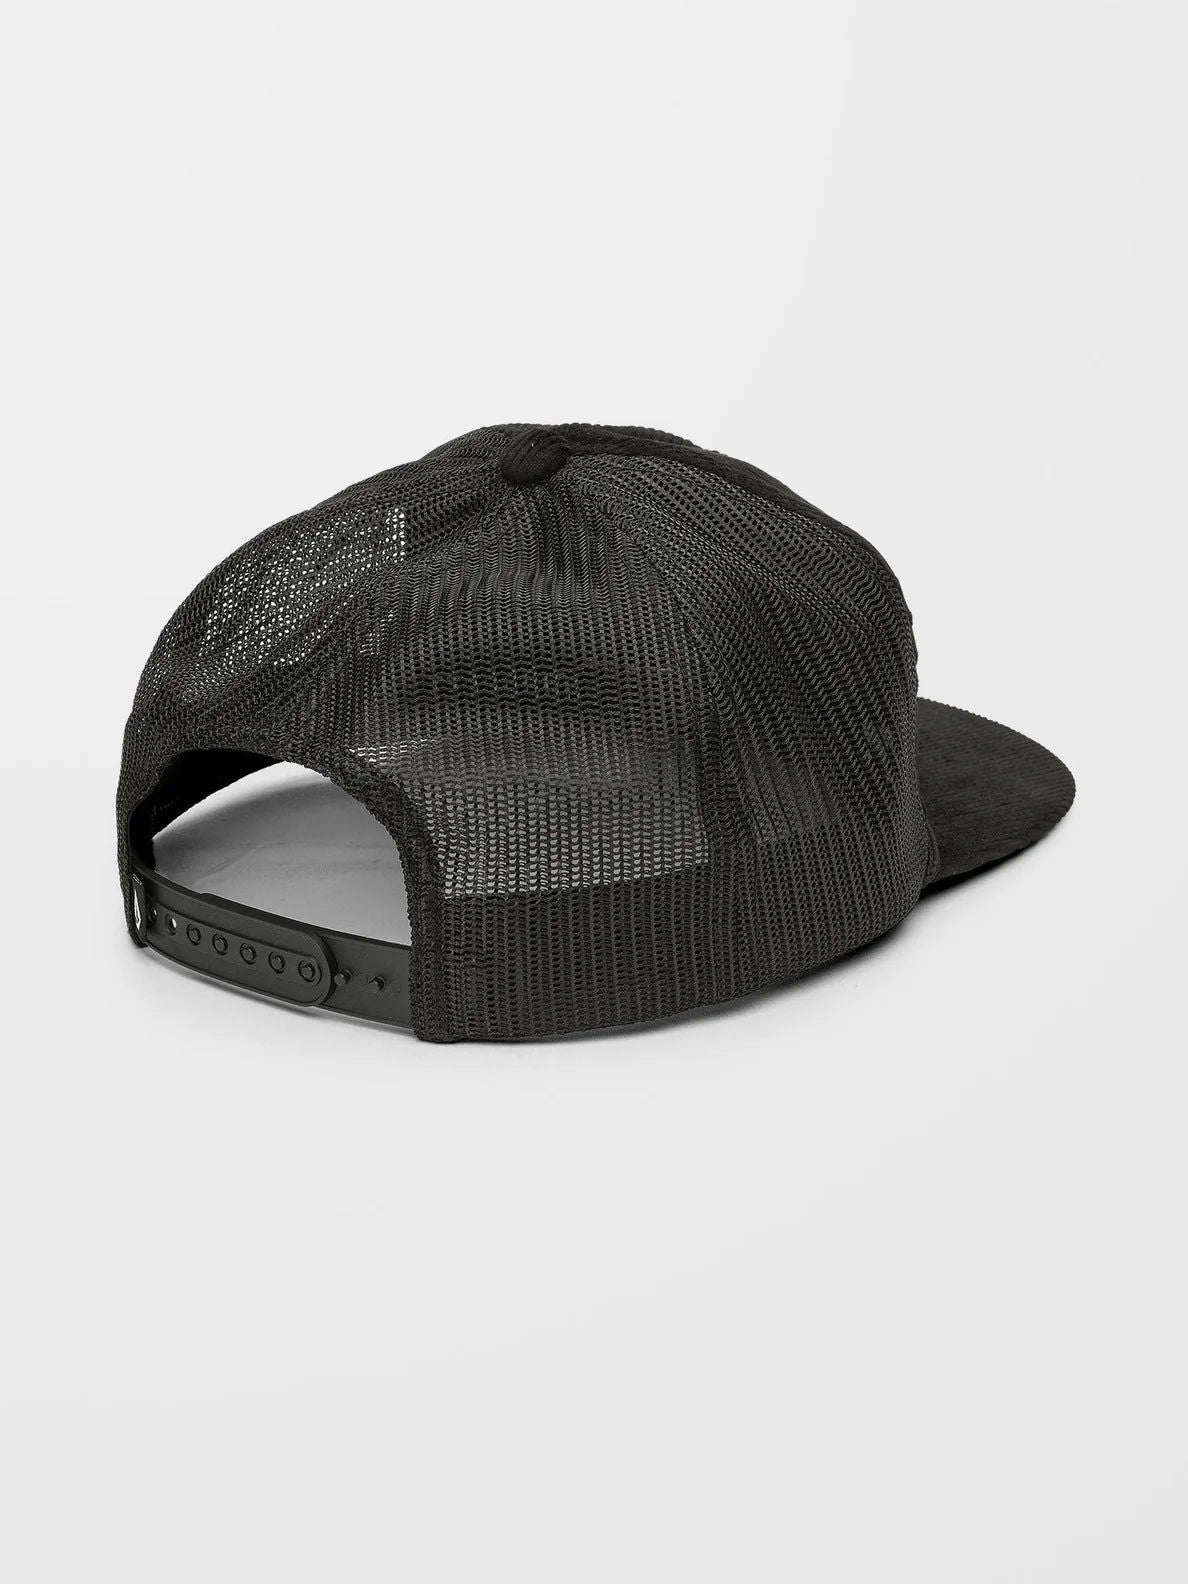 Volcom - Take It Higher Trucker Cap | Black -  - Married to the Sea Surf Shop - 